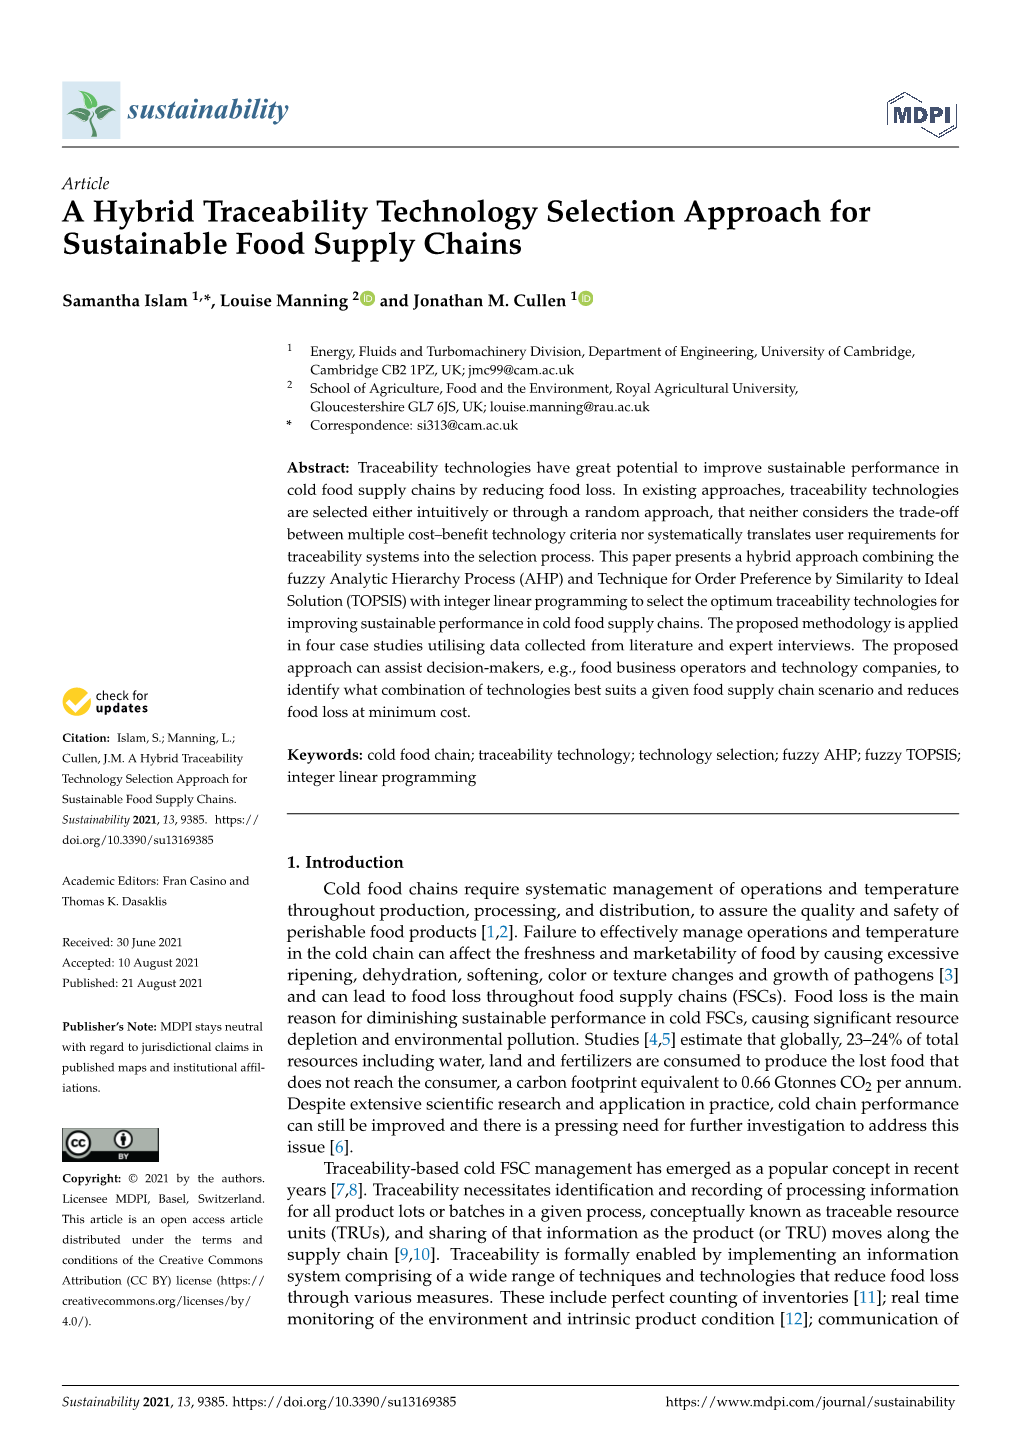 A Hybrid Traceability Technology Selection Approach for Sustainable Food Supply Chains